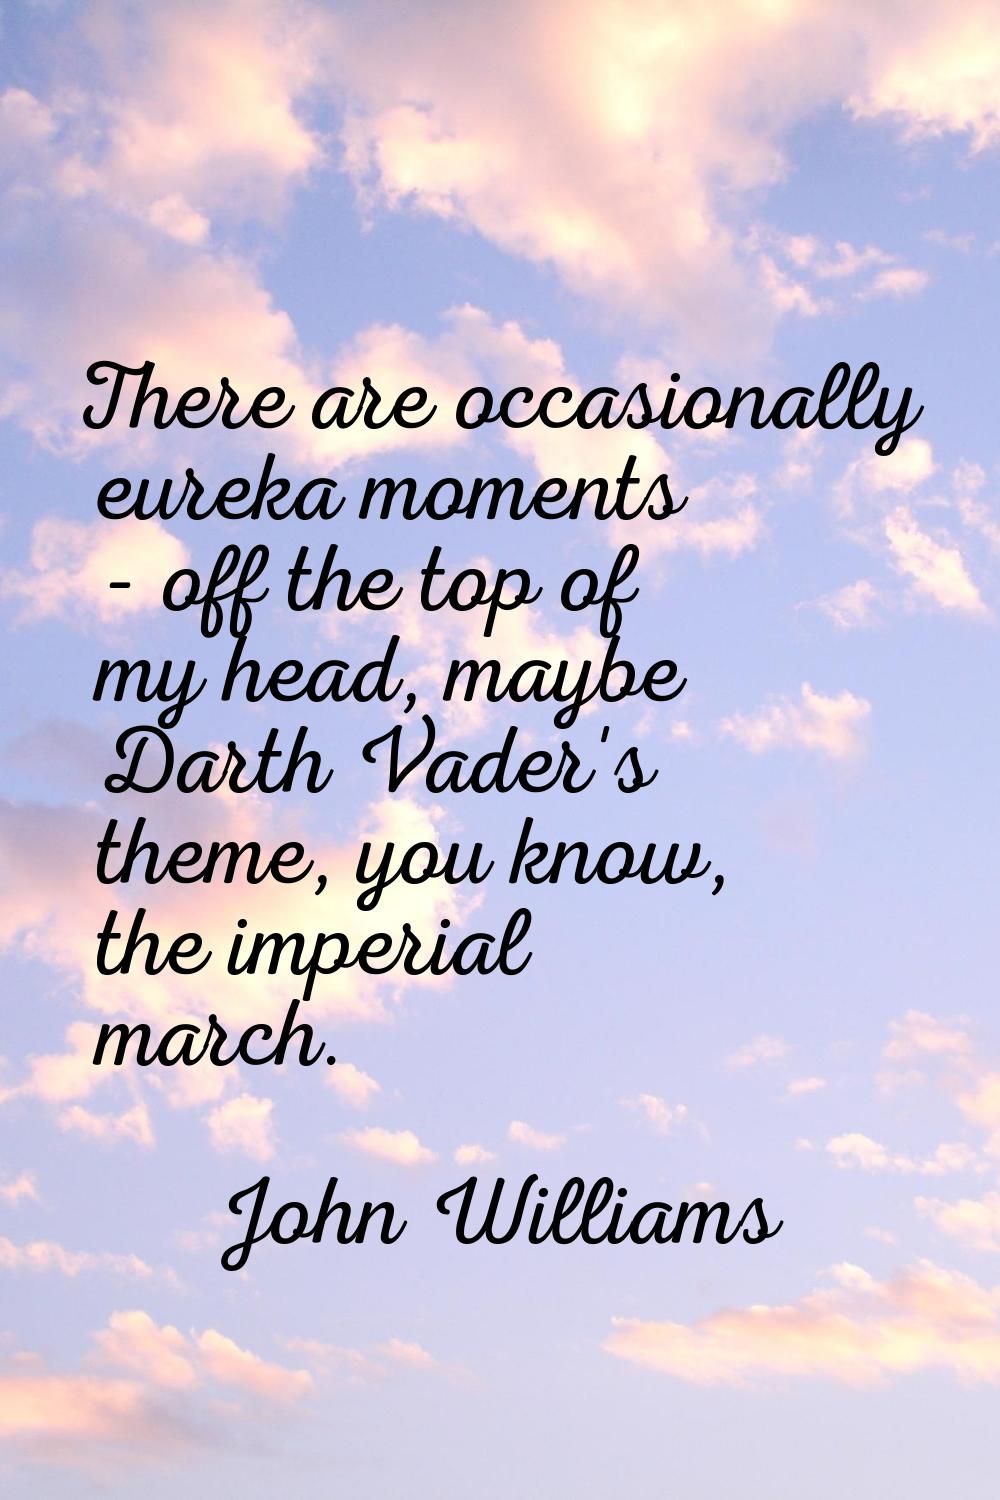 There are occasionally eureka moments - off the top of my head, maybe Darth Vader's theme, you know